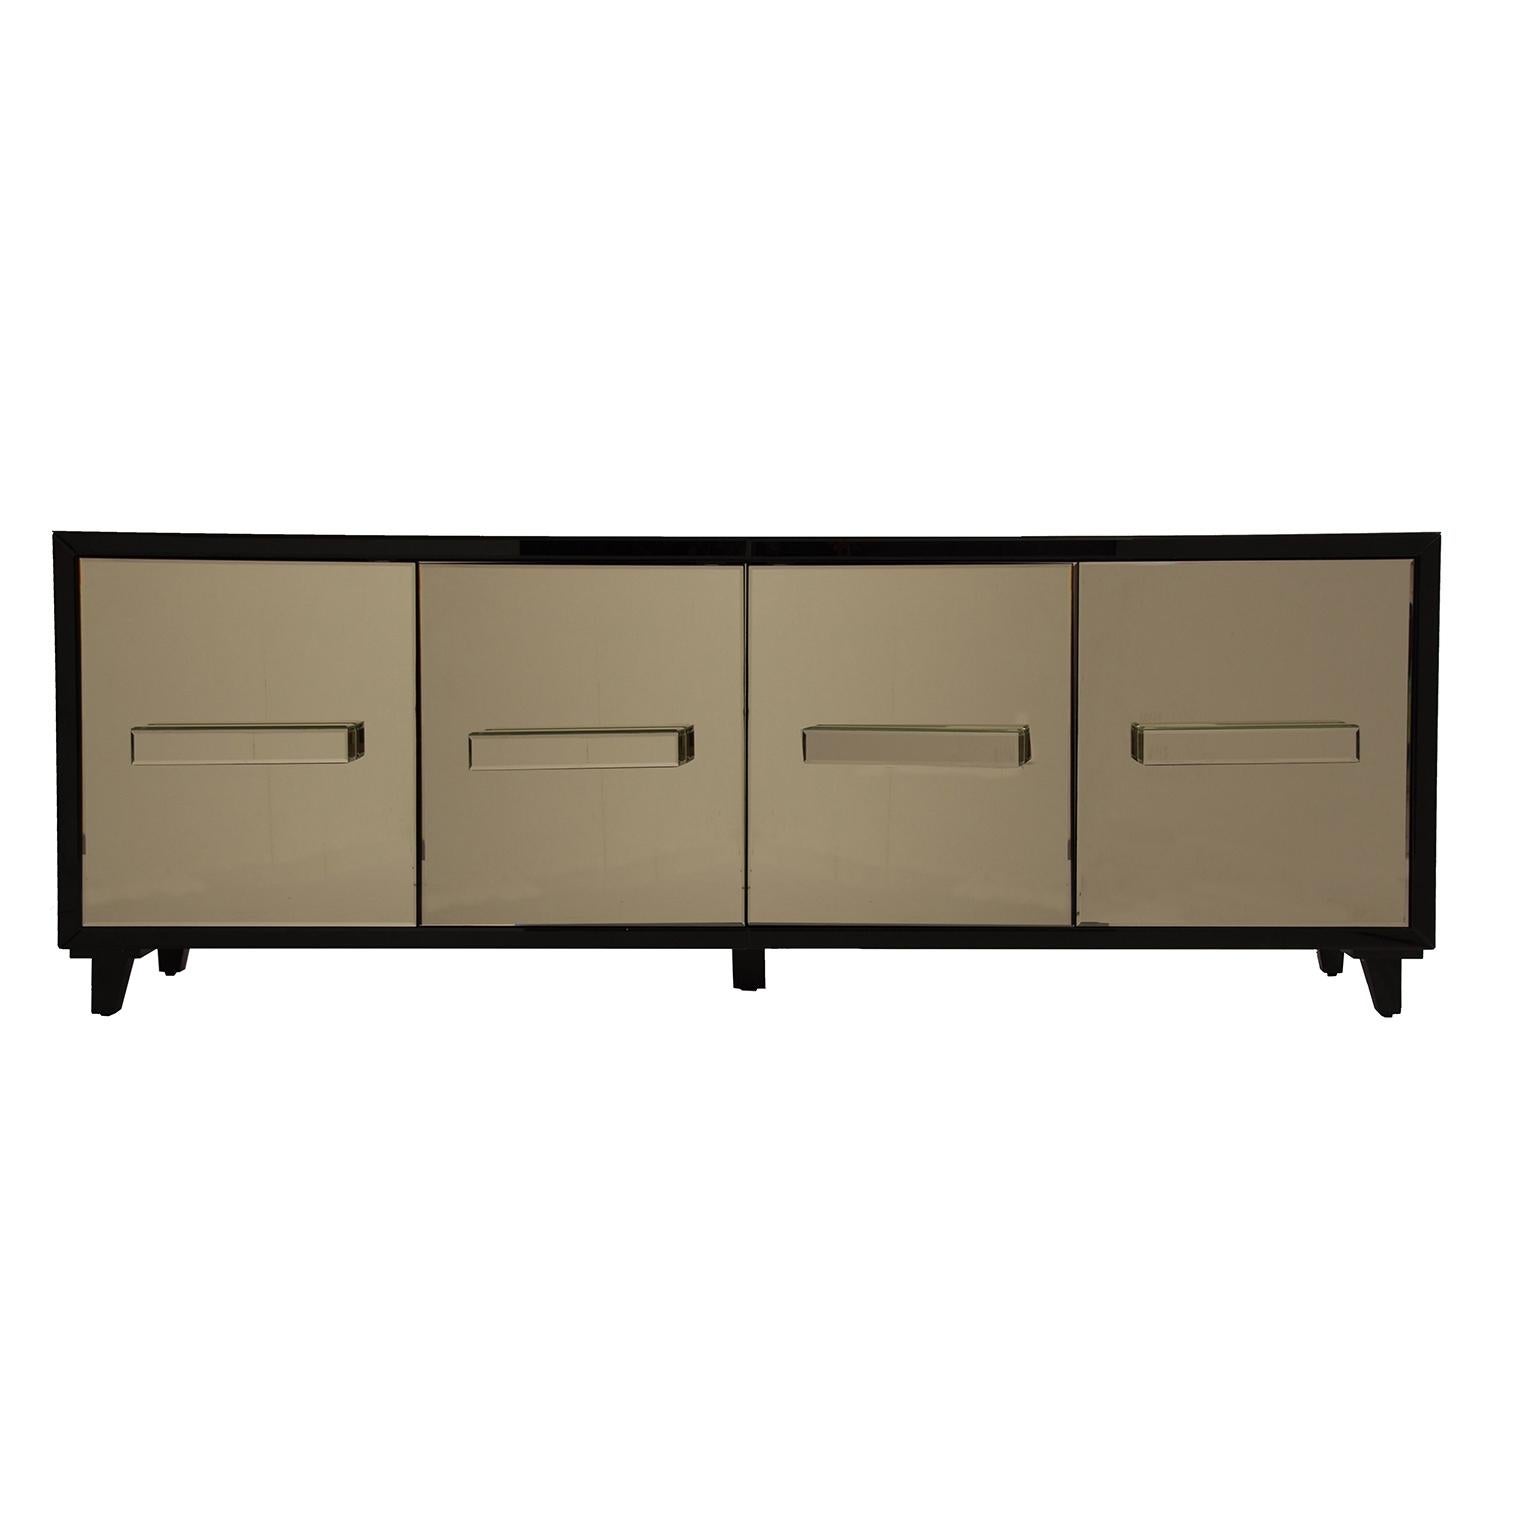 Amazing and sophisticated gold mirrored sideboard with four mirrored doors that open on shelves. Classy, trendy and glossy! (New item, never used).
 